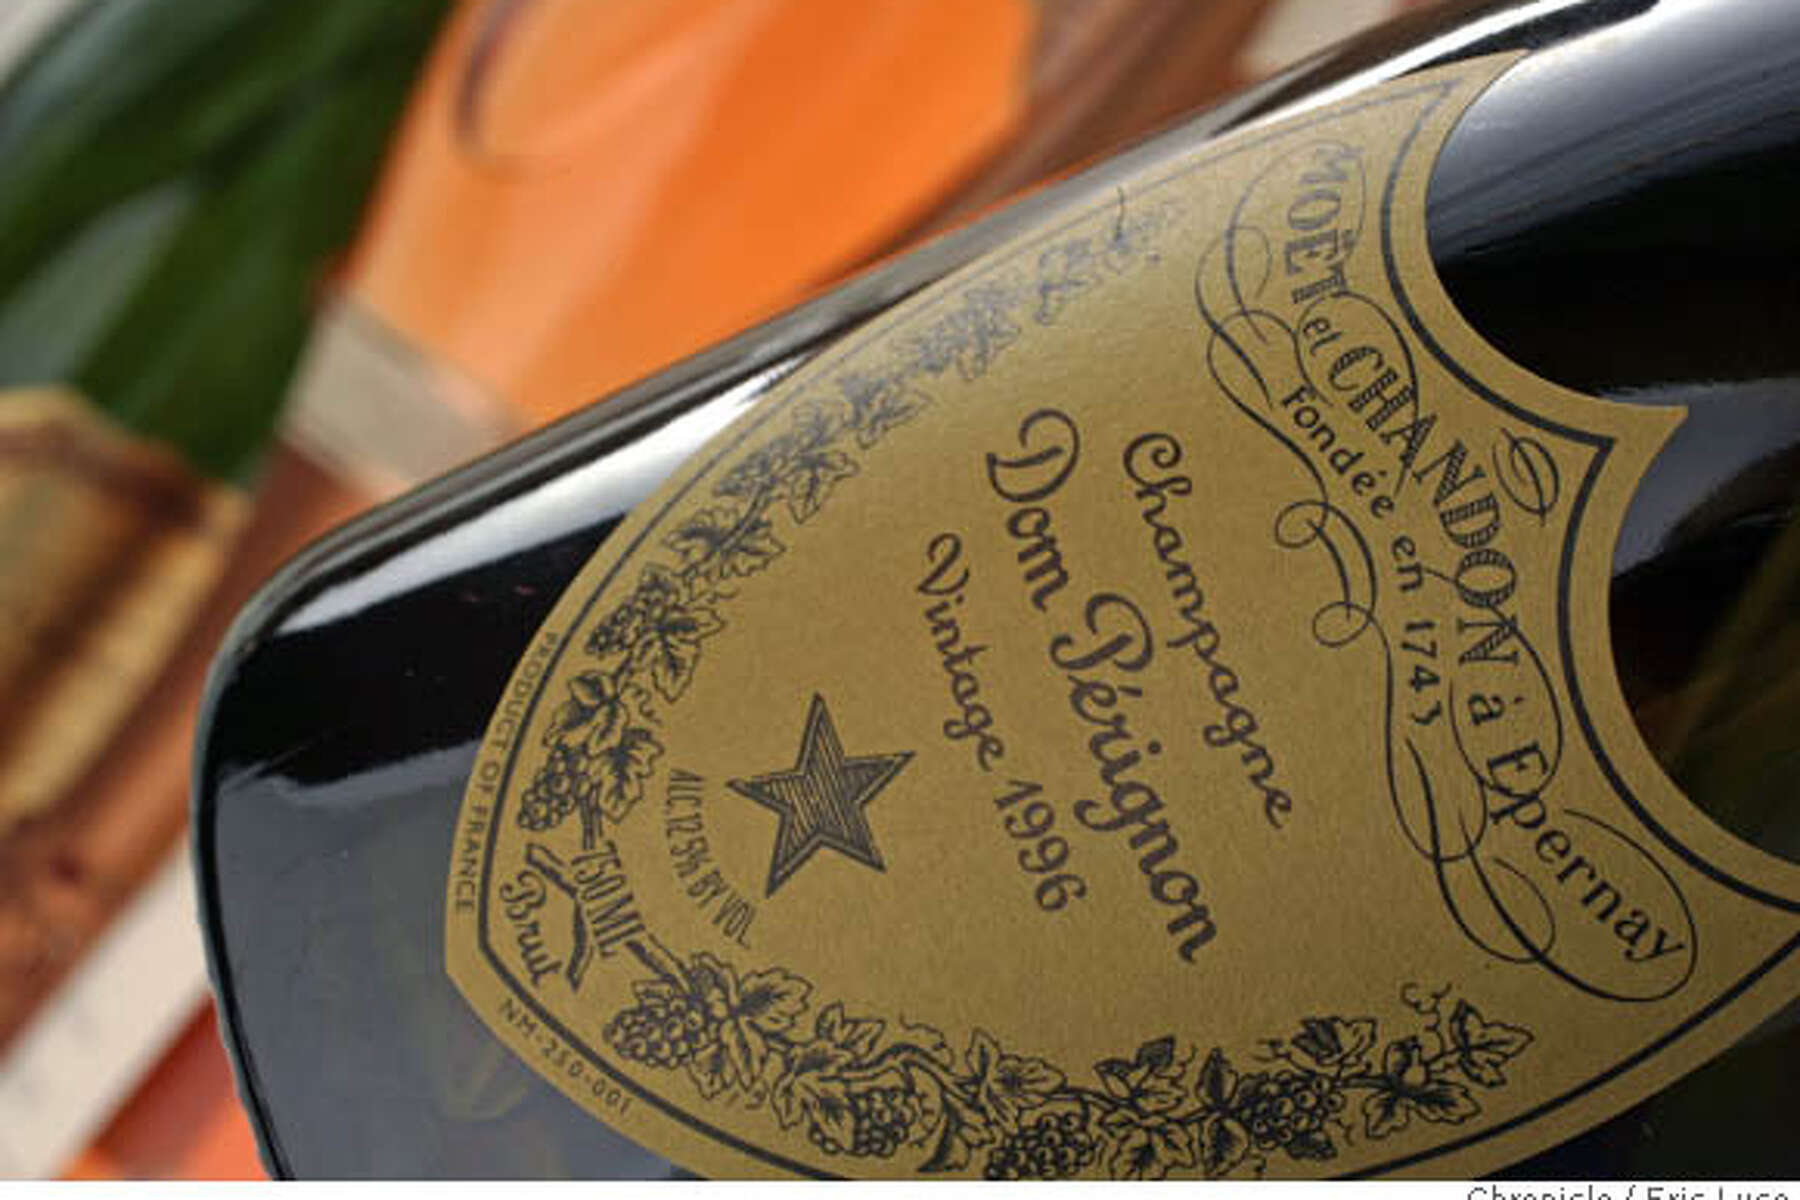 Winemaking monk Dom Perignon's fame continues to bubble